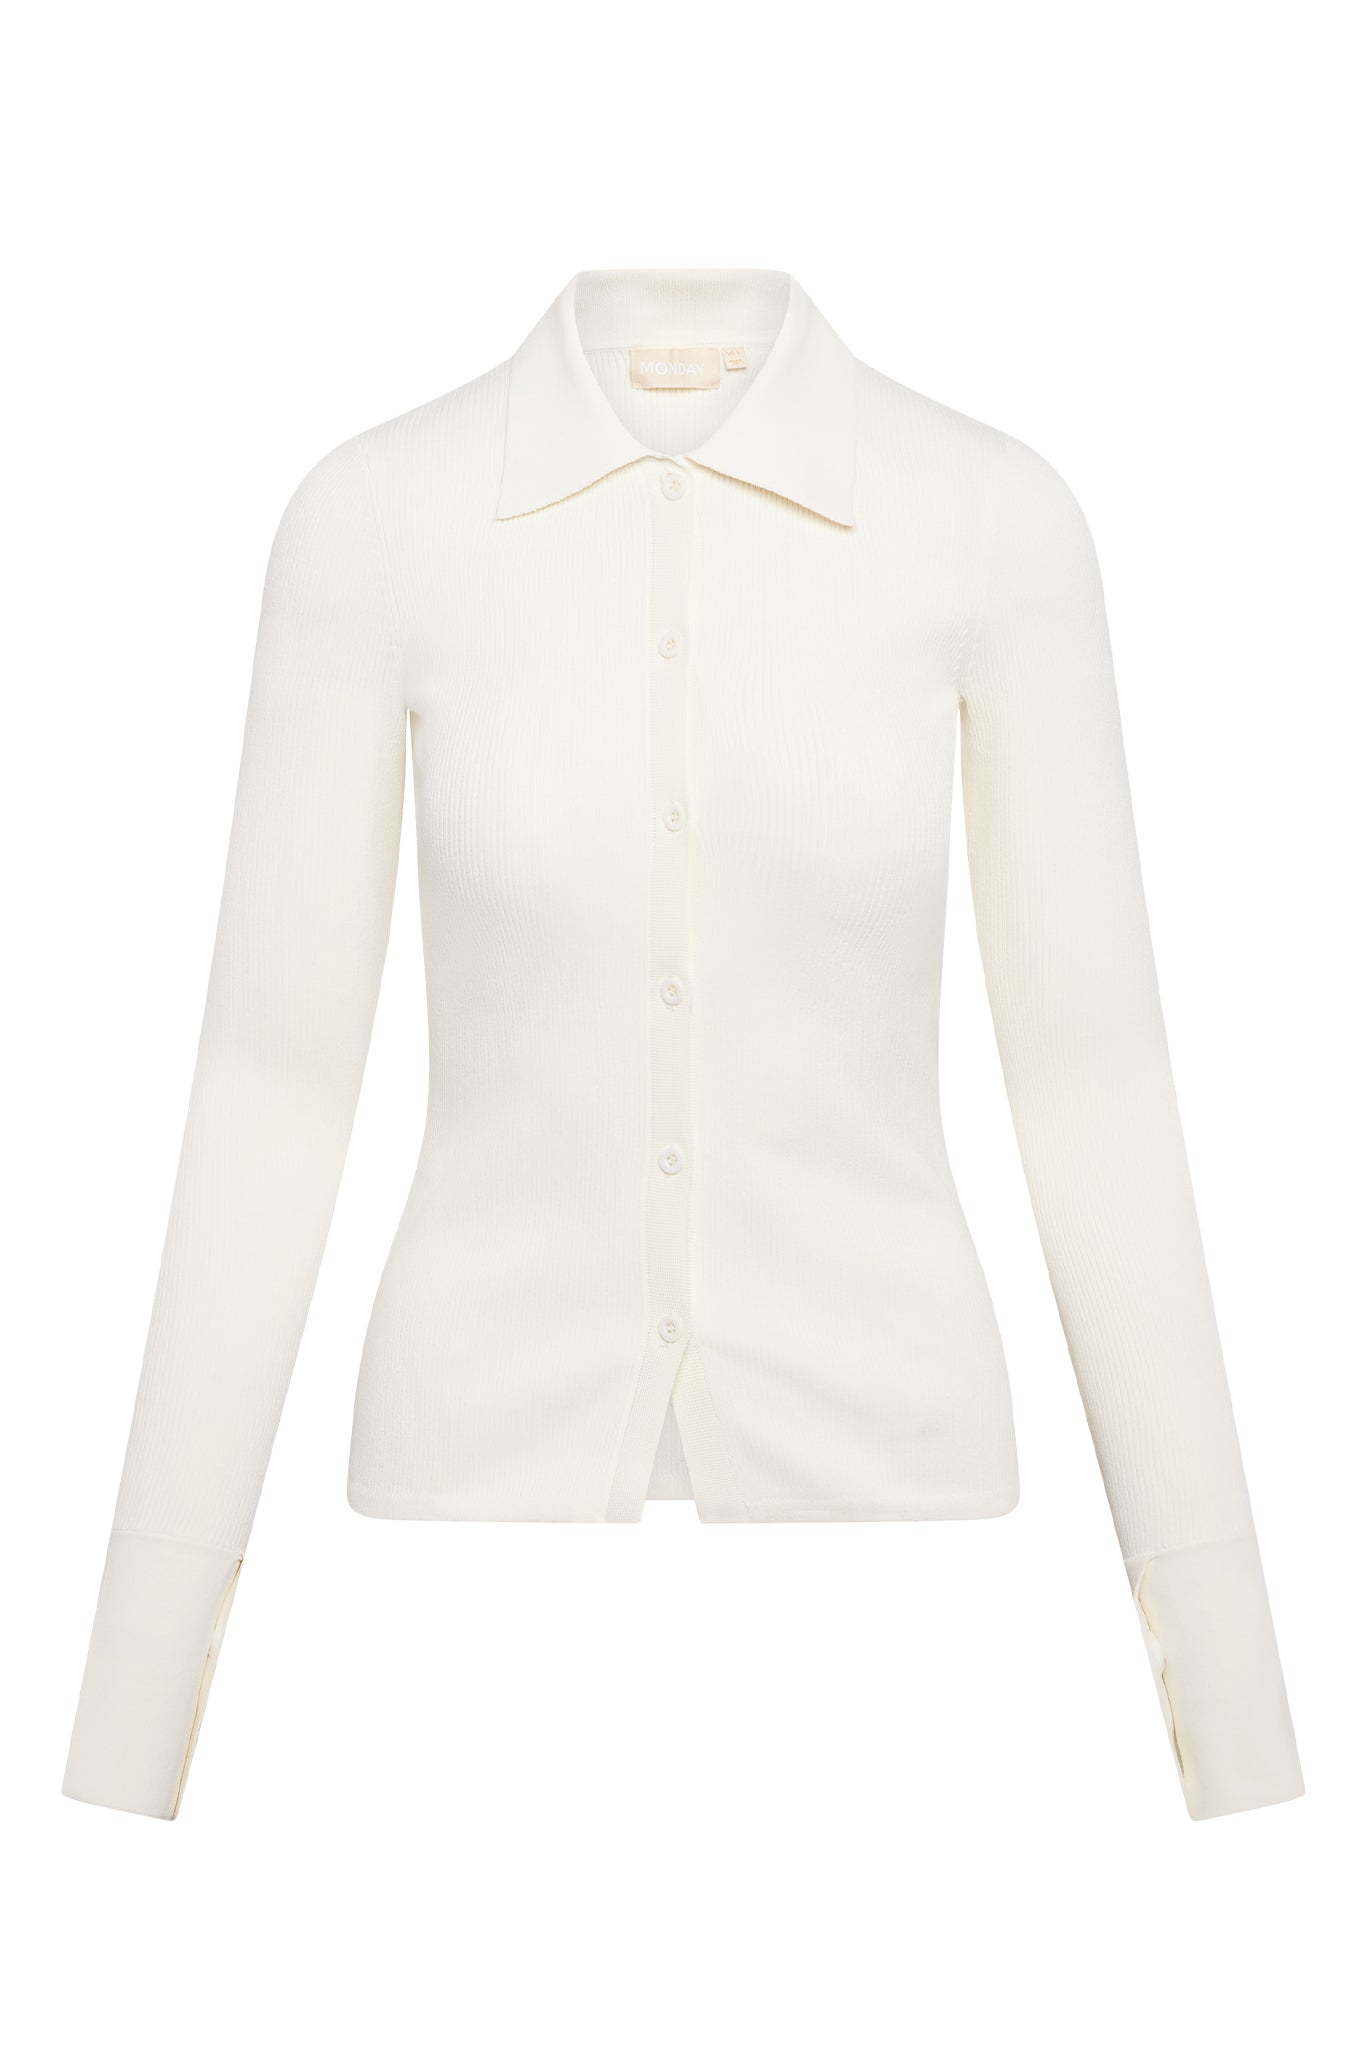 Collared Jersey Top - Ivory